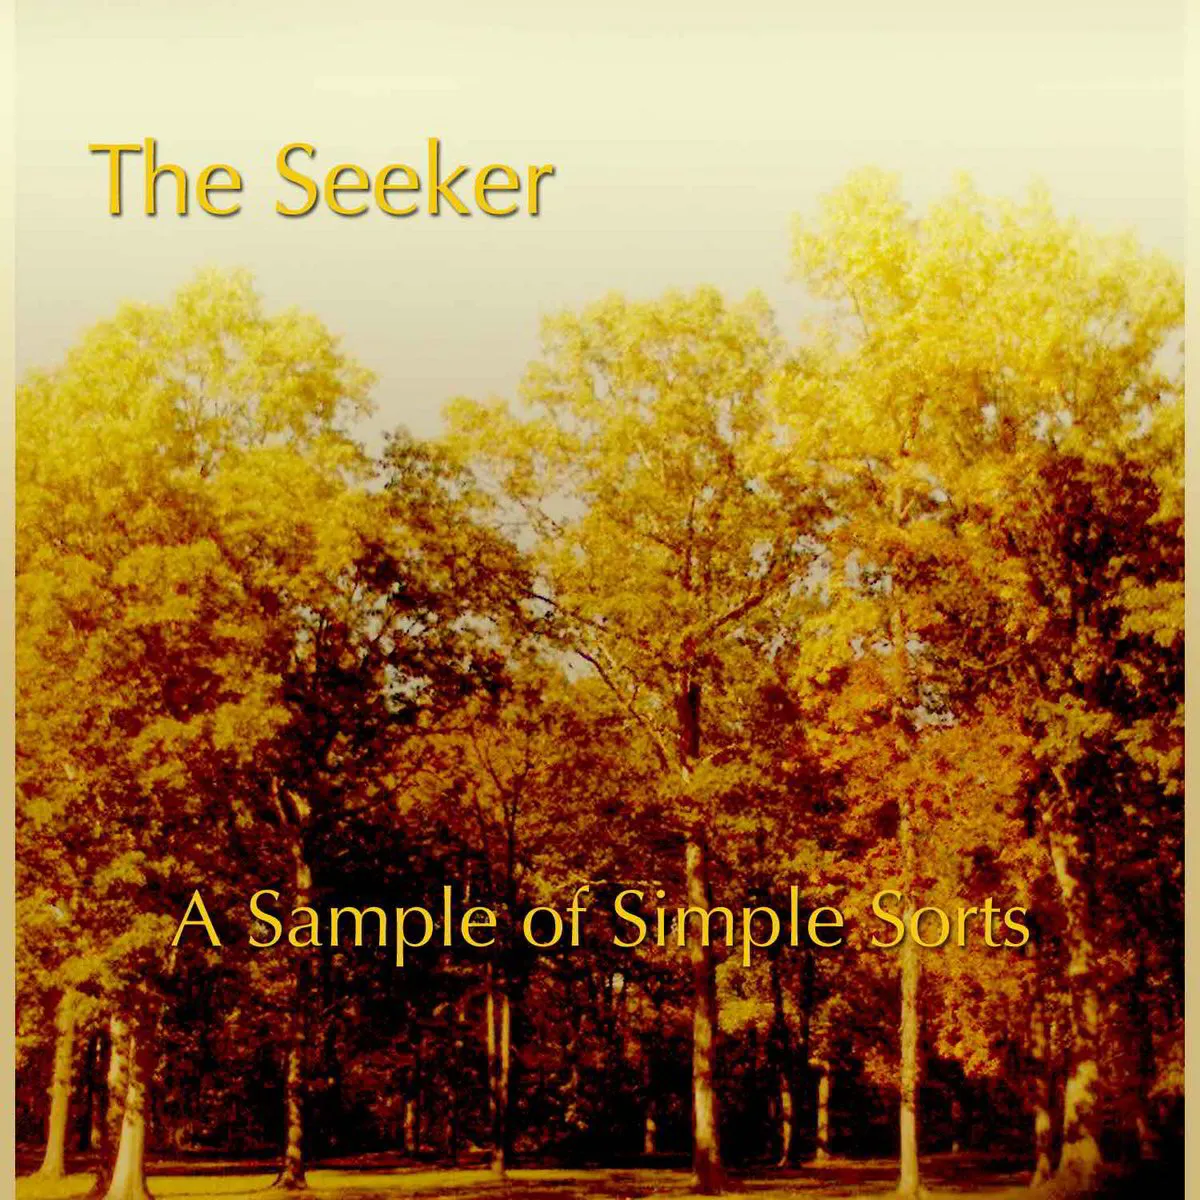 The Seeker - A Sample of Simple Sorts